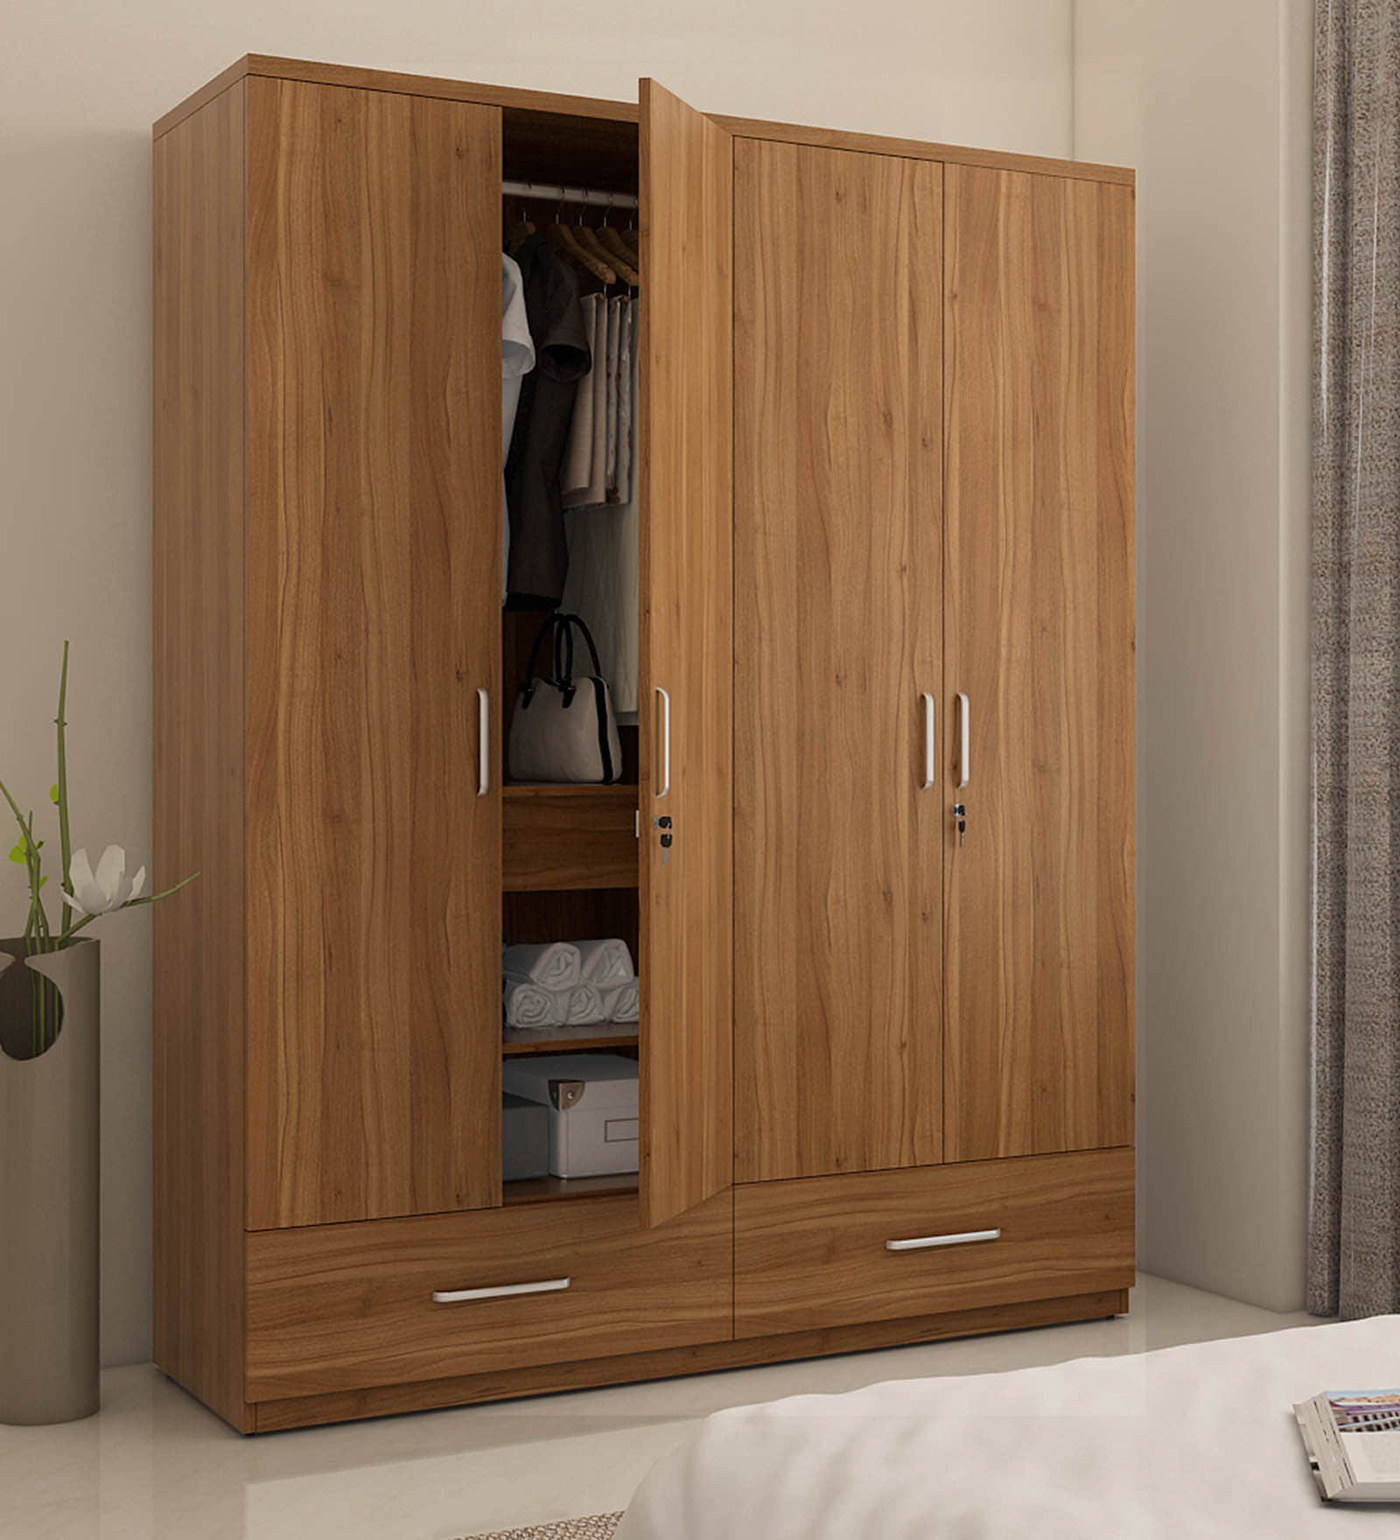 wardrobes Pepperfry Bedroom Wardrobes cloth cupboard cupboard for clothes wardrobes online